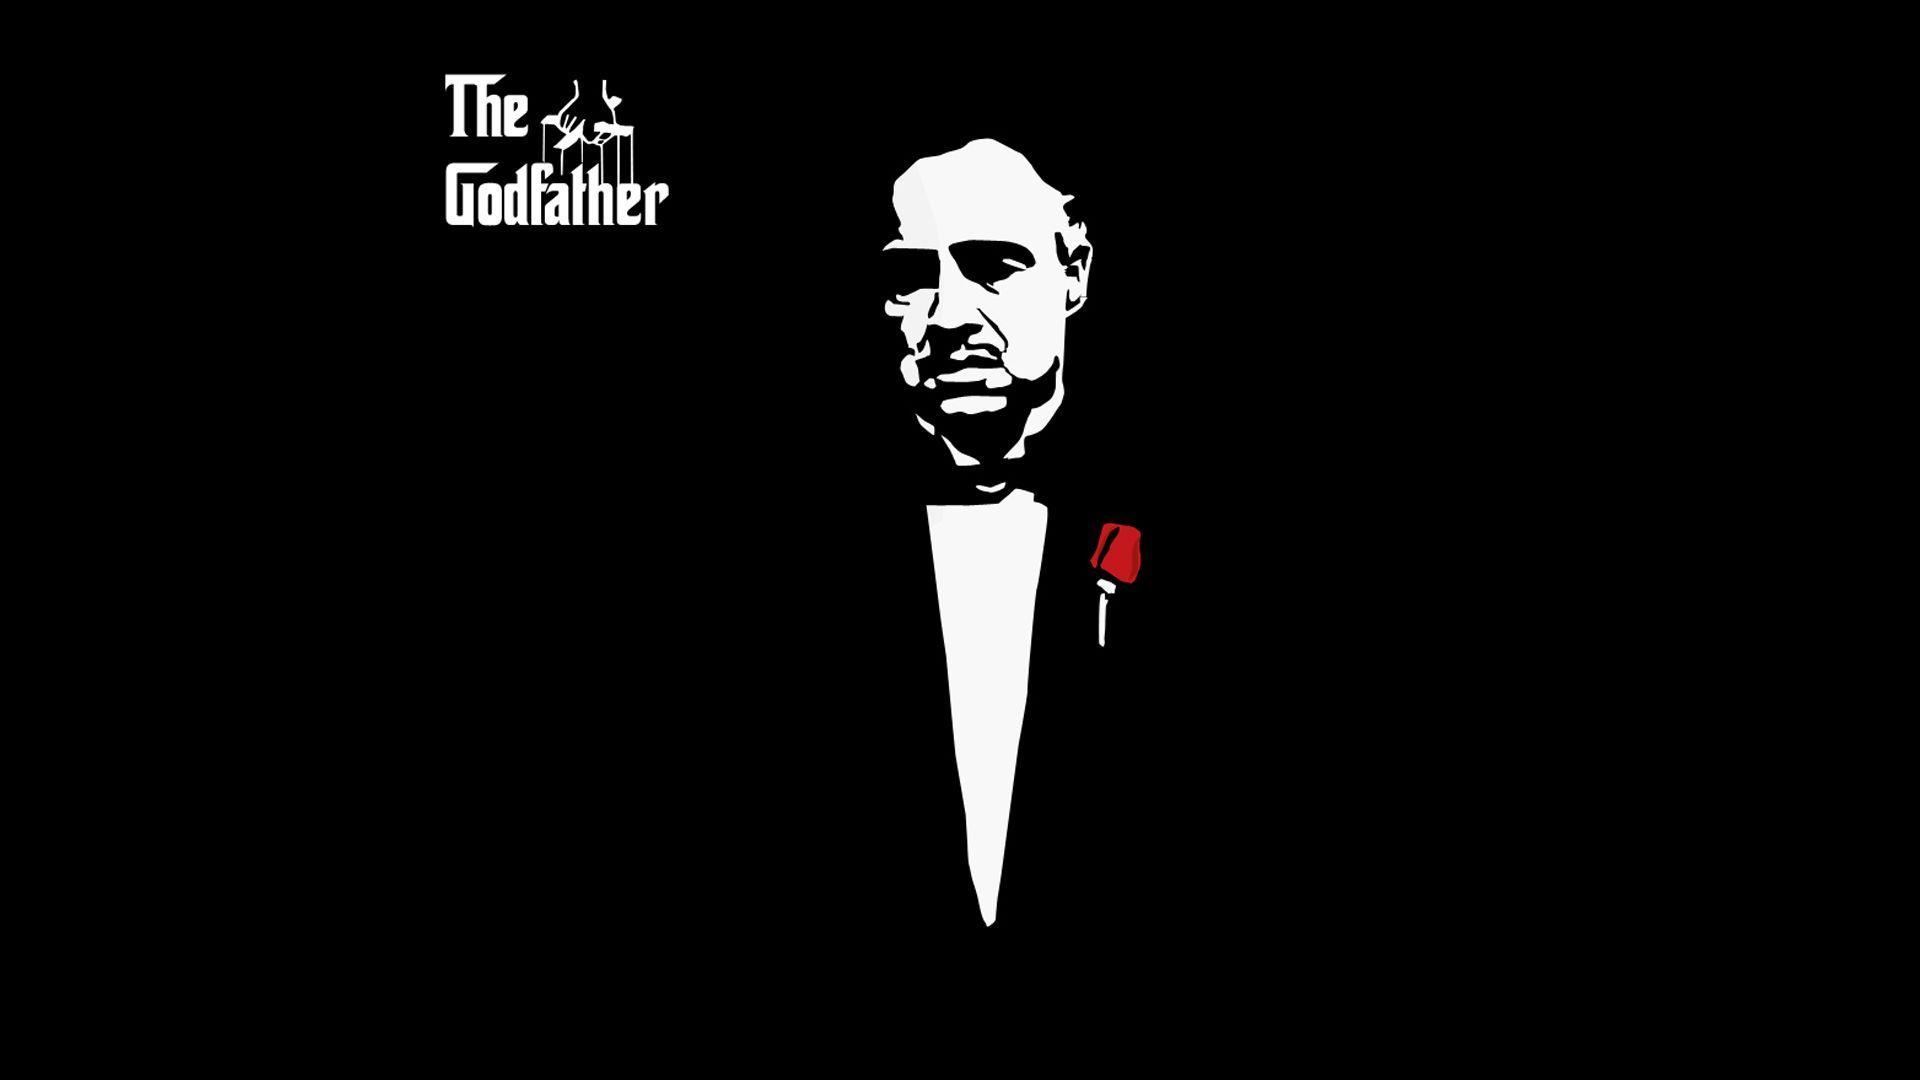 The Godfather Wallpaper. The Godfather Background